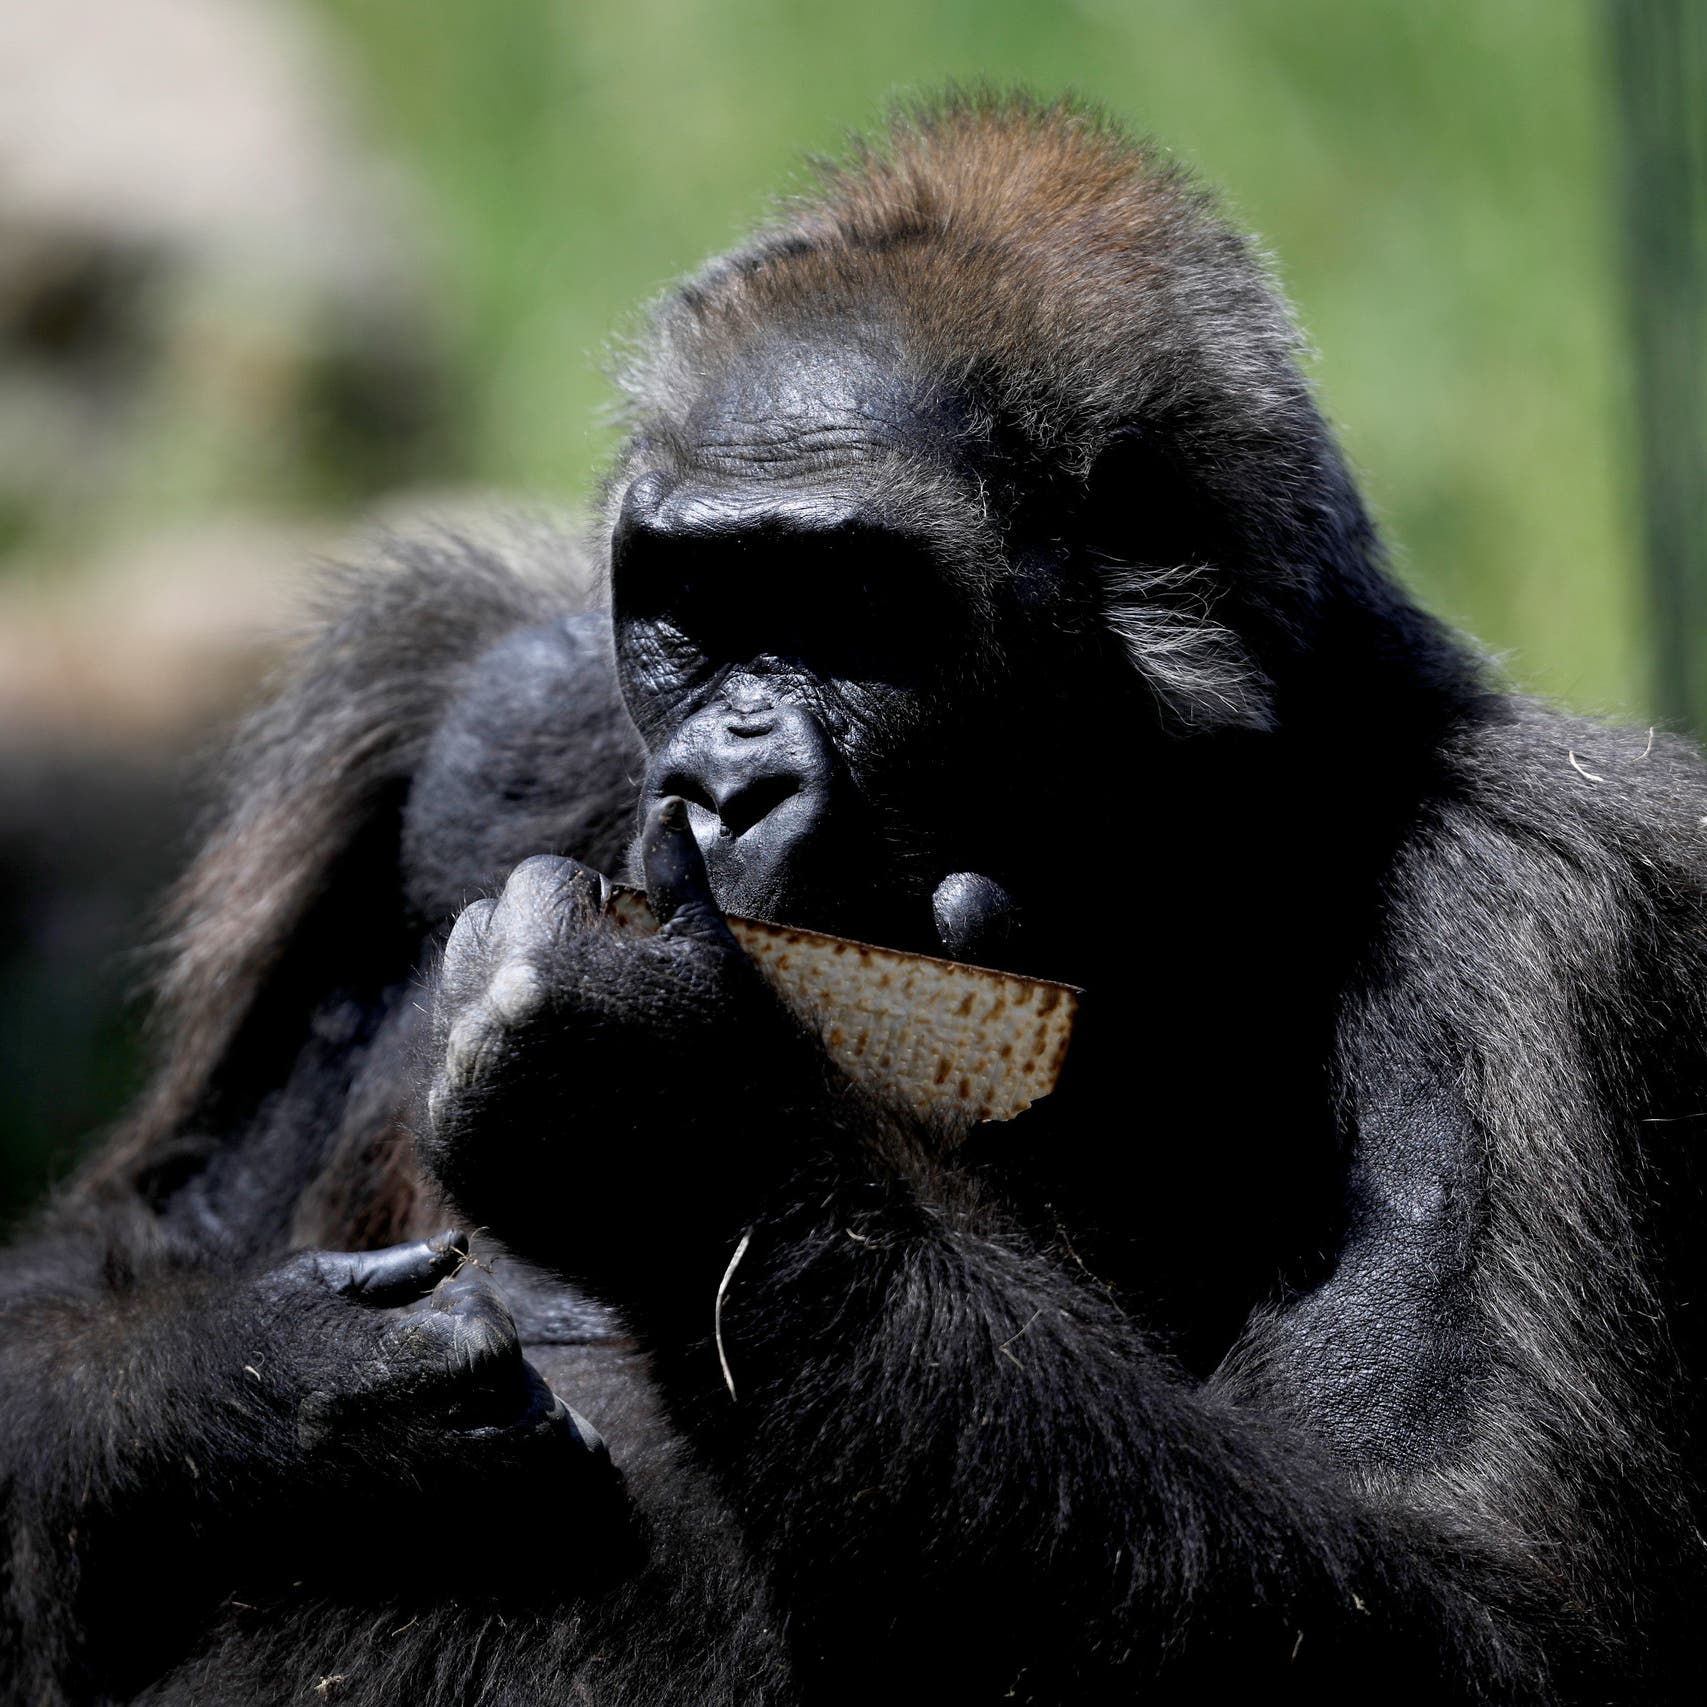 Woman having ‘affair’ with chimpanzee not banned, asked to ‘change her behavior’